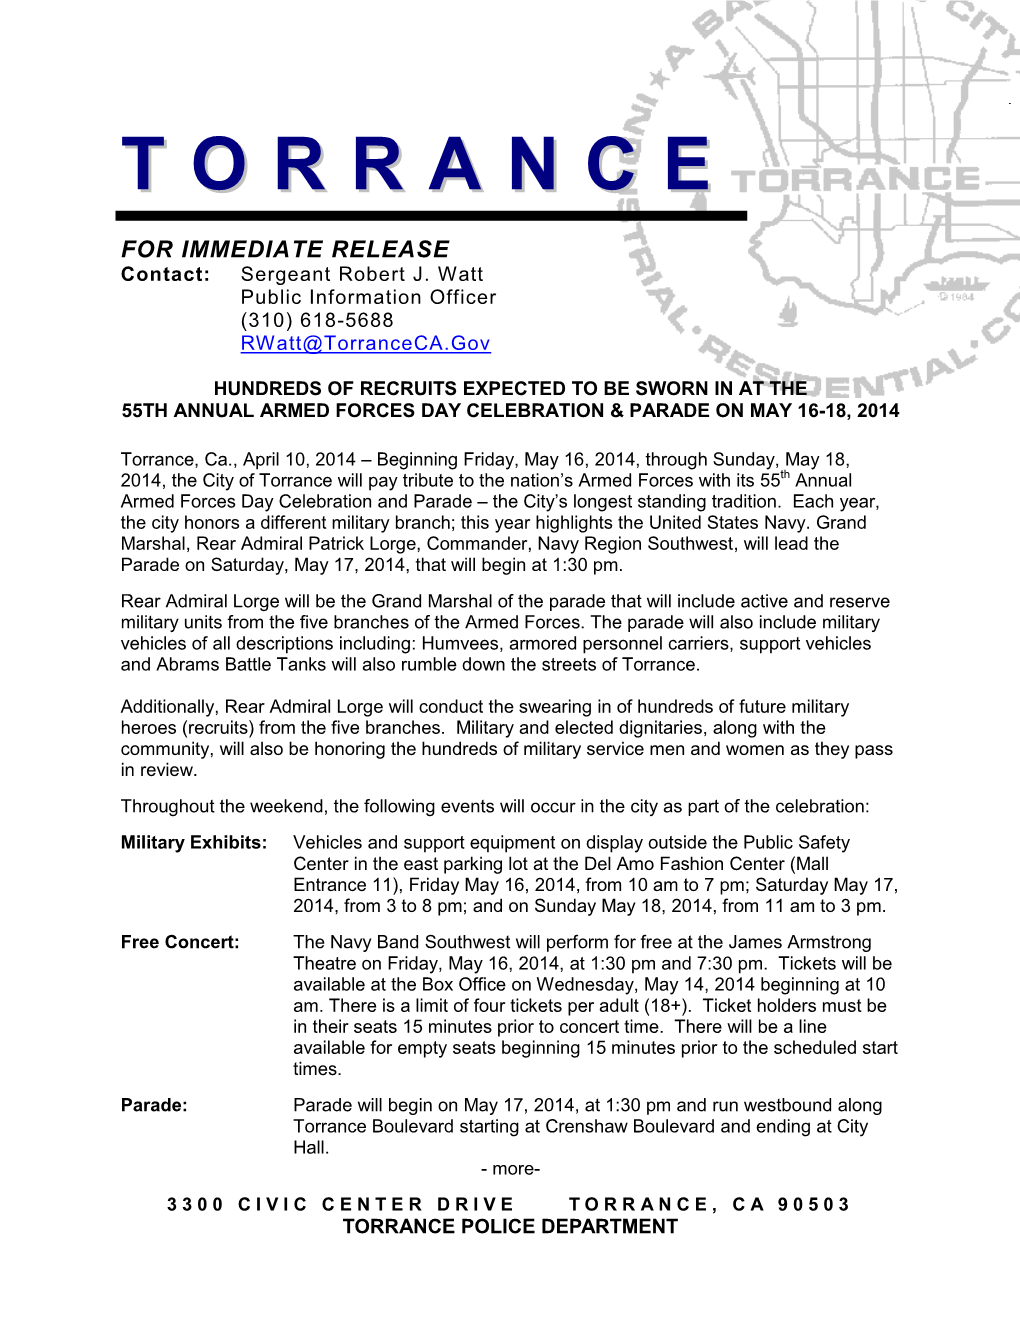 City of Torrance Will Pay Tribute to the Nation’S Armed Forces with Its 55Th Annual Armed Forces Day Celebration and Parade – the City’S Longest Standing Tradition